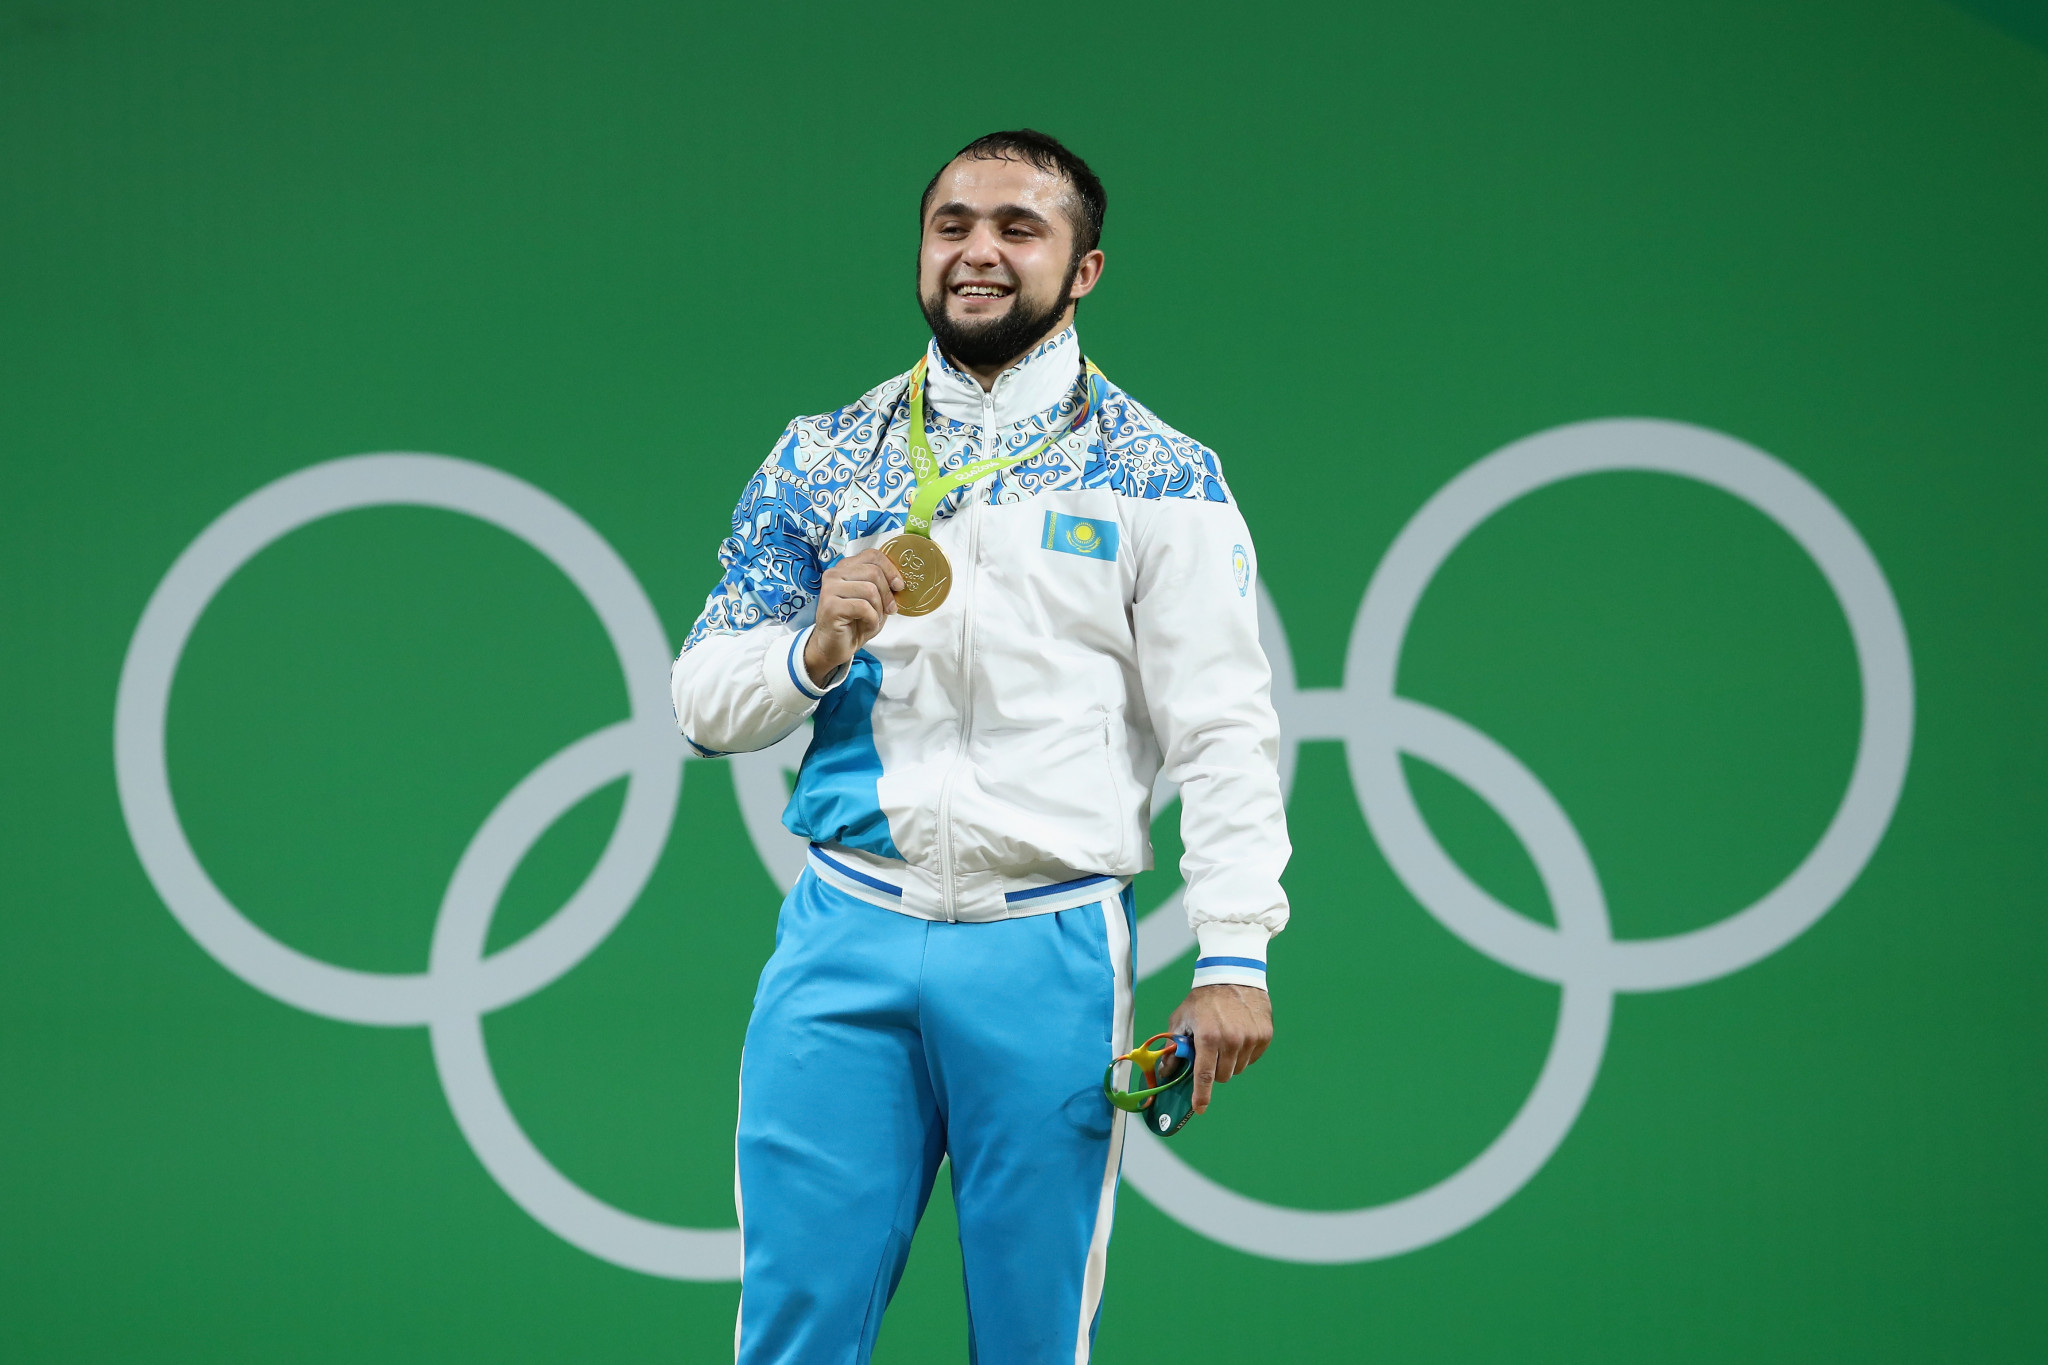 Exclusive: Disqualified Olympic gold medal weightlifter Rahimov contests sample swapping ban